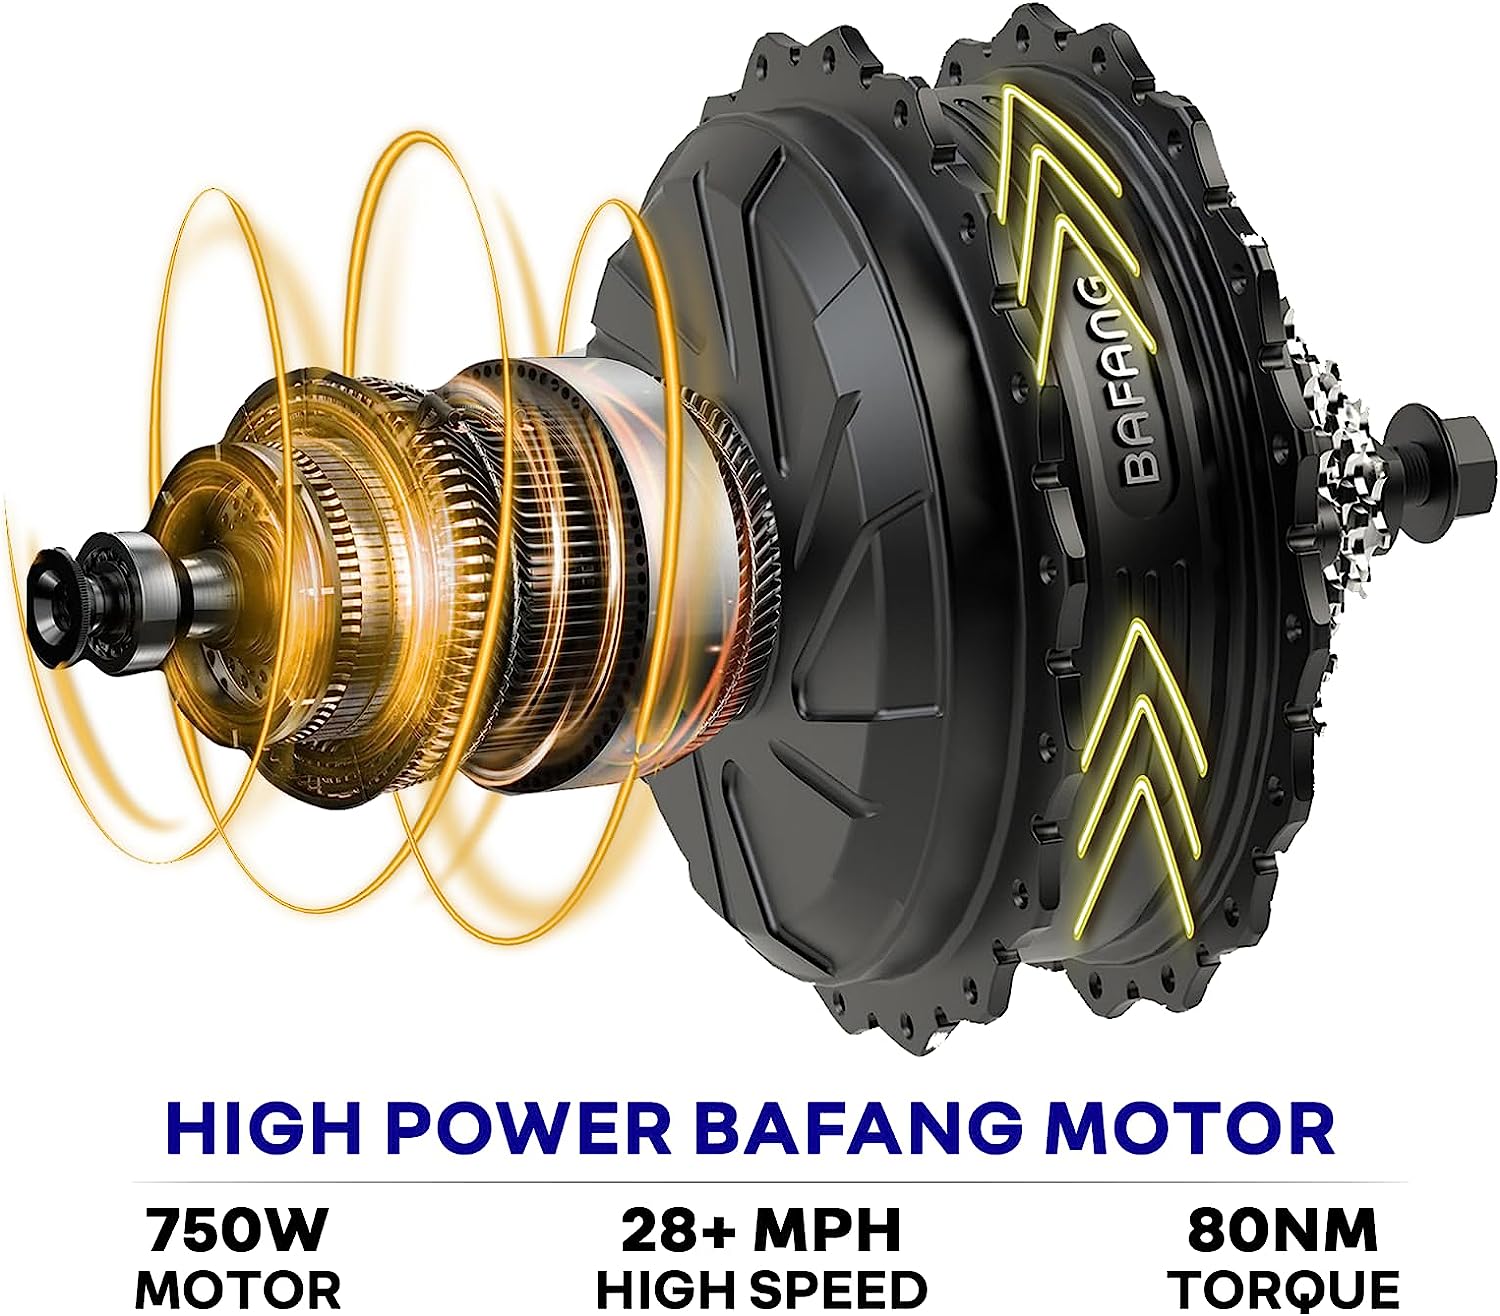 750W Bafang Motor for Powerful Performance